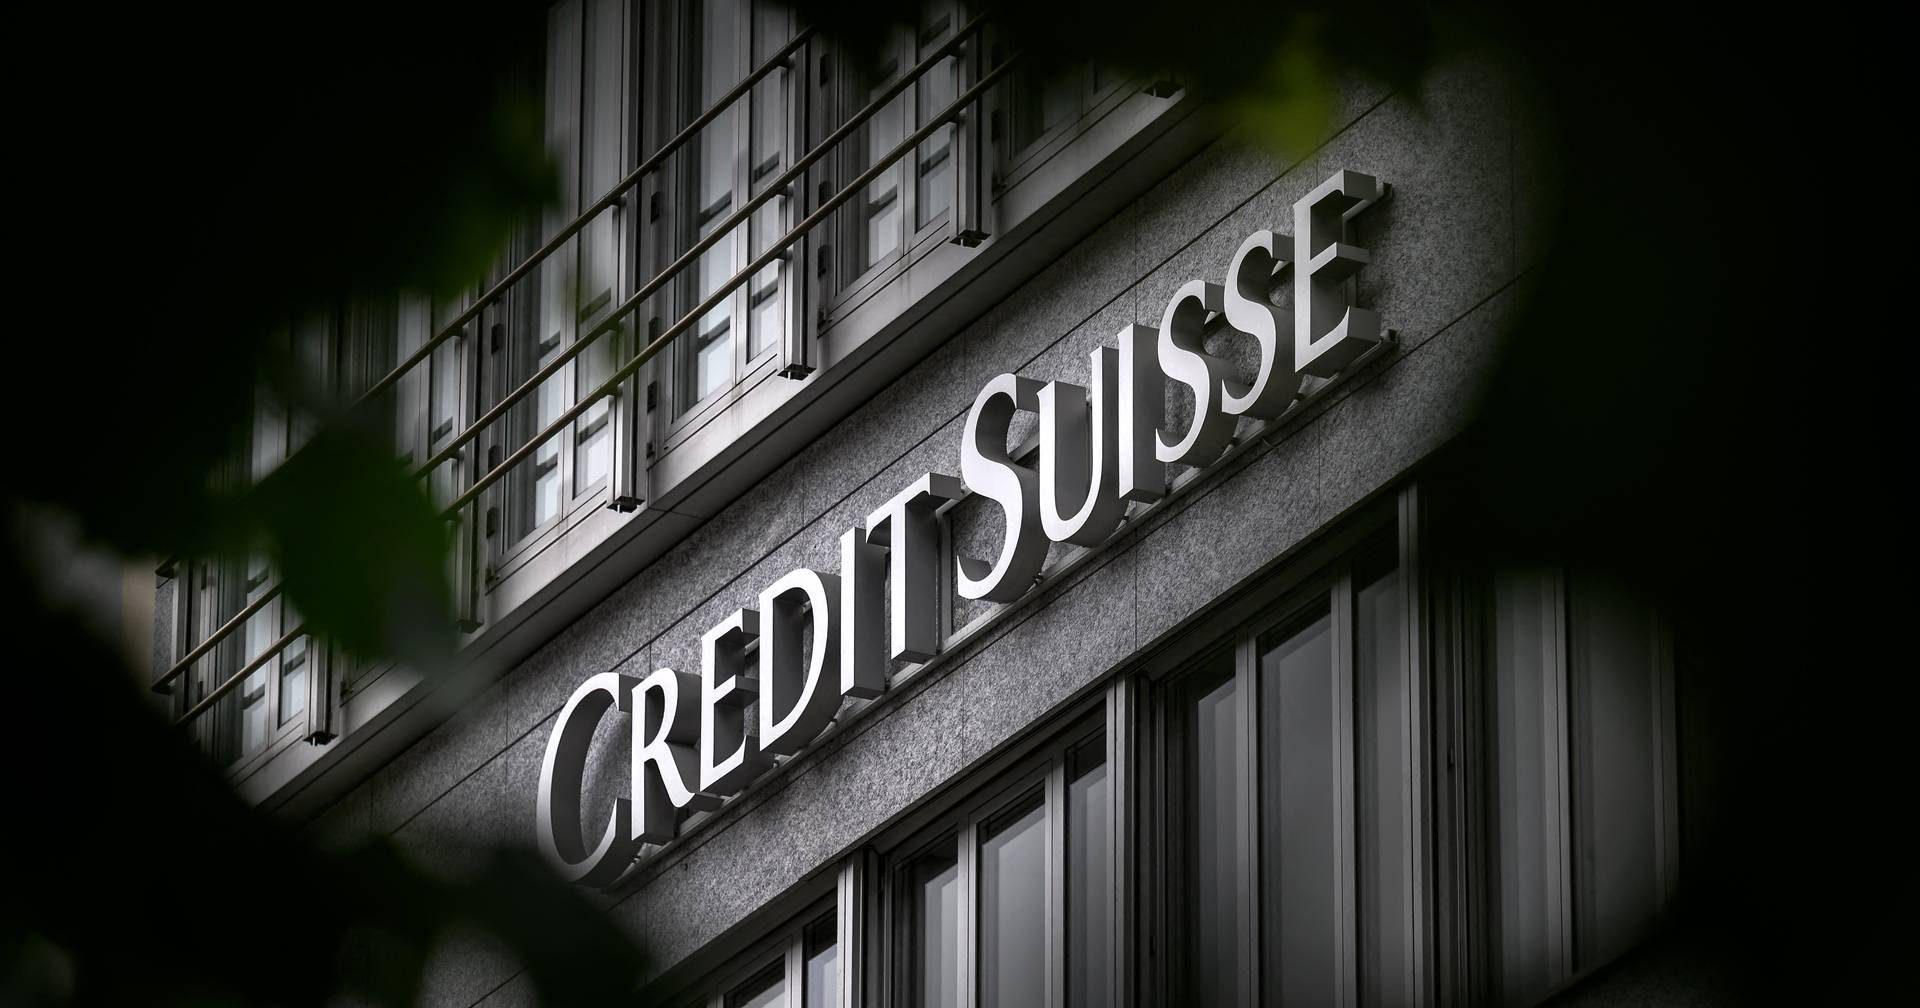 The Swiss Central Bank is available to help Credit Suisse